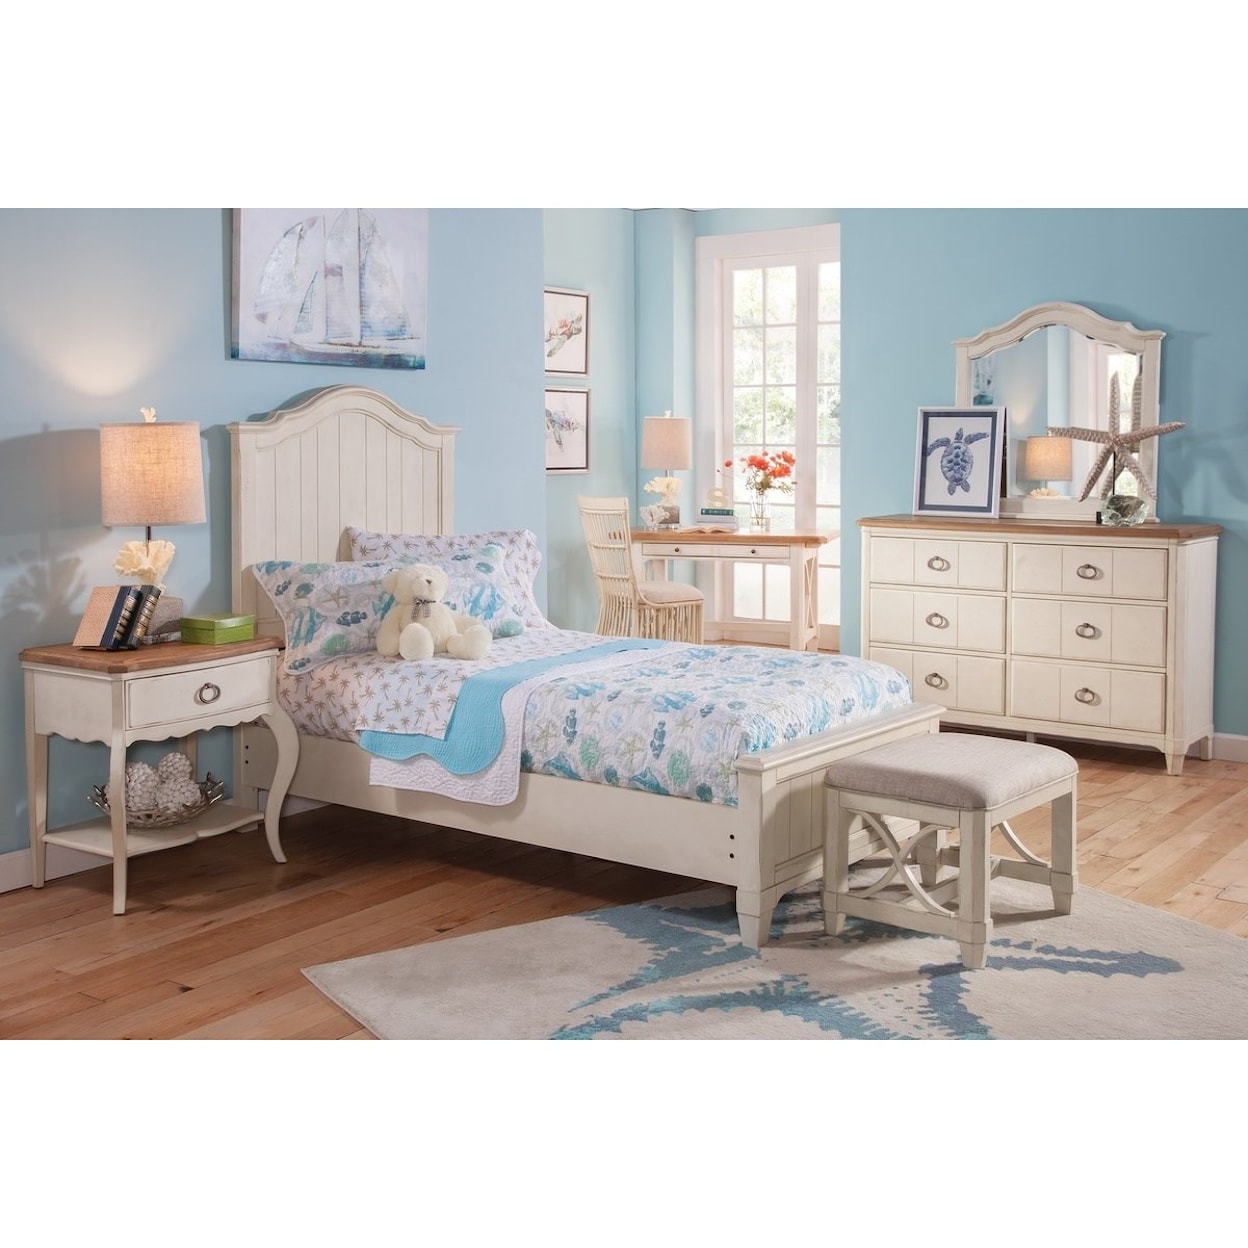 Panama Jack by Palmetto Home Millbrook Twin Bedroom Group